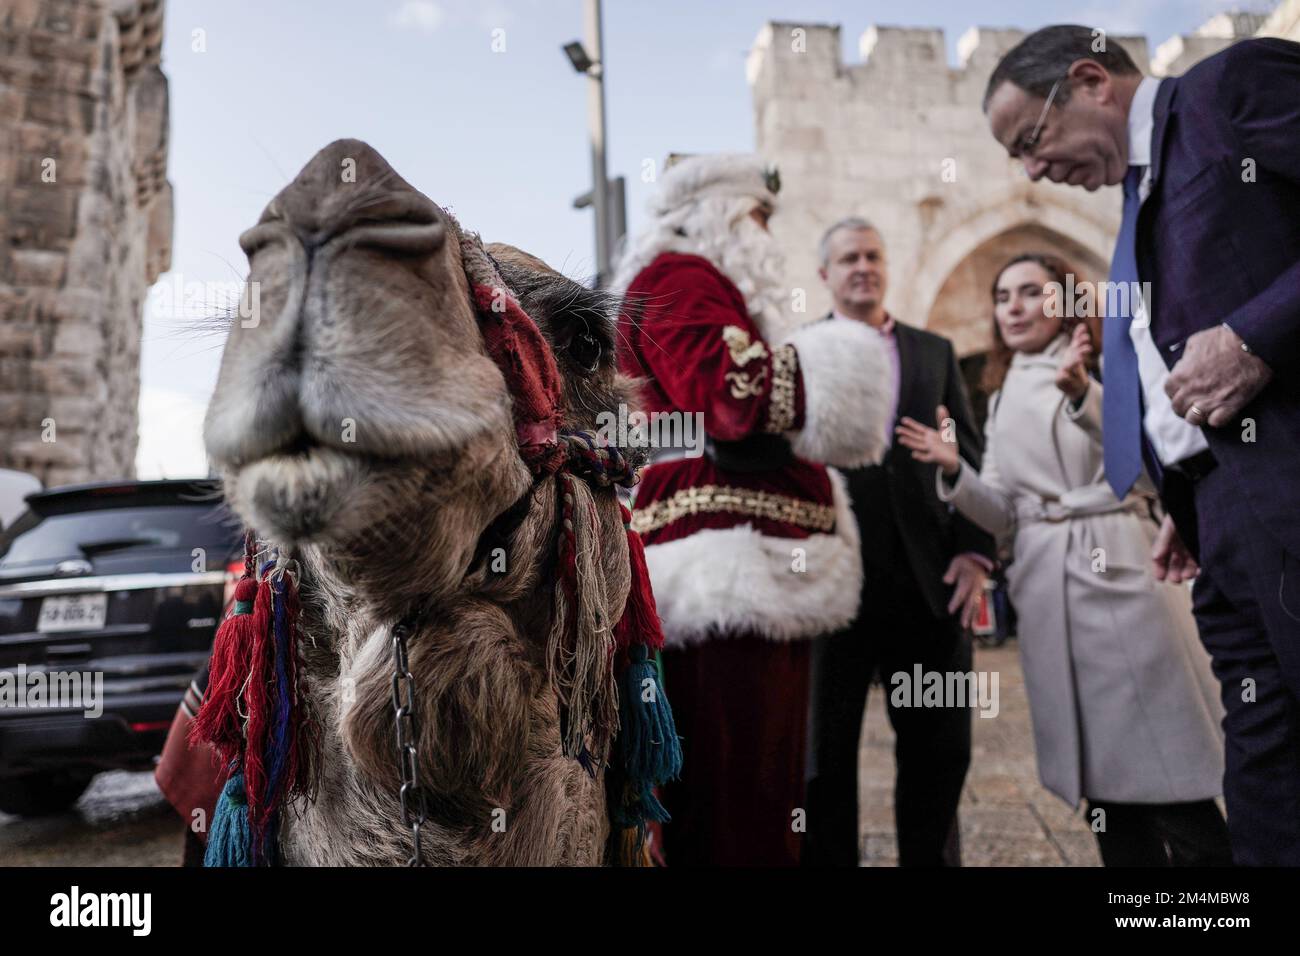 Jerusalem, Israel. 22nd Dec, 2022. U.S. Ambassador to Israel, THOMAS NIDES (R), and GEORGE NOLL (C), Chief Of The U.S. Office Of Palestinian Affairs, meet Santa Claus, portrayed by ISSA KASSISSIEH, at the Old City's Jaffa Gate. Credit: Nir Alon/Alamy Live News Stock Photo